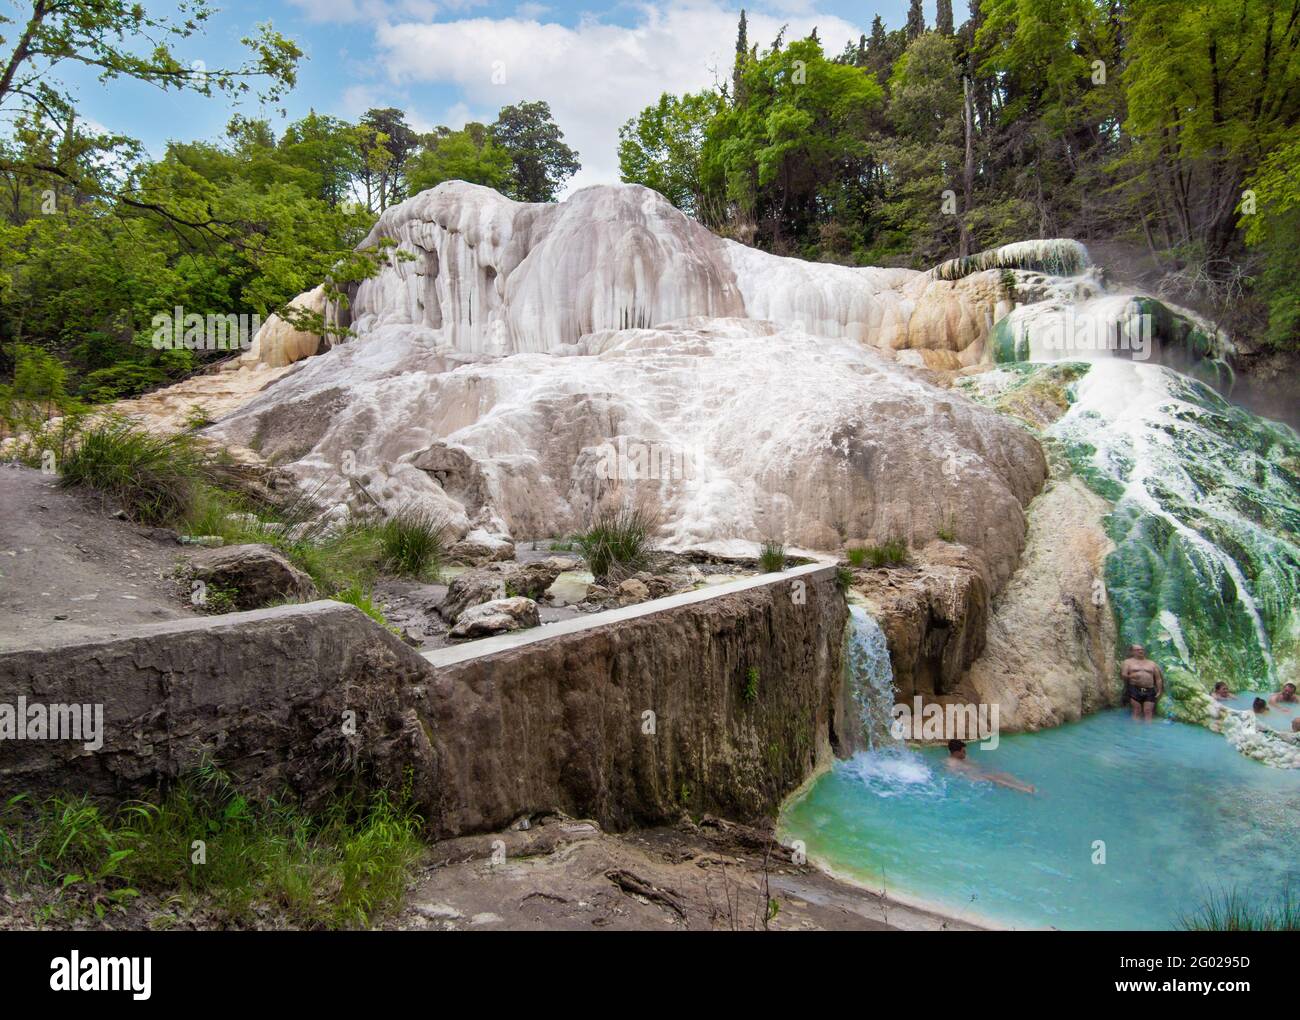 Bagni San Filippo (Italy) - In Tuscany region on Monte Amiata, it's a  public and wild small hot waterfall with white stone deposit named Balena  Bianca Stock Photo - Alamy